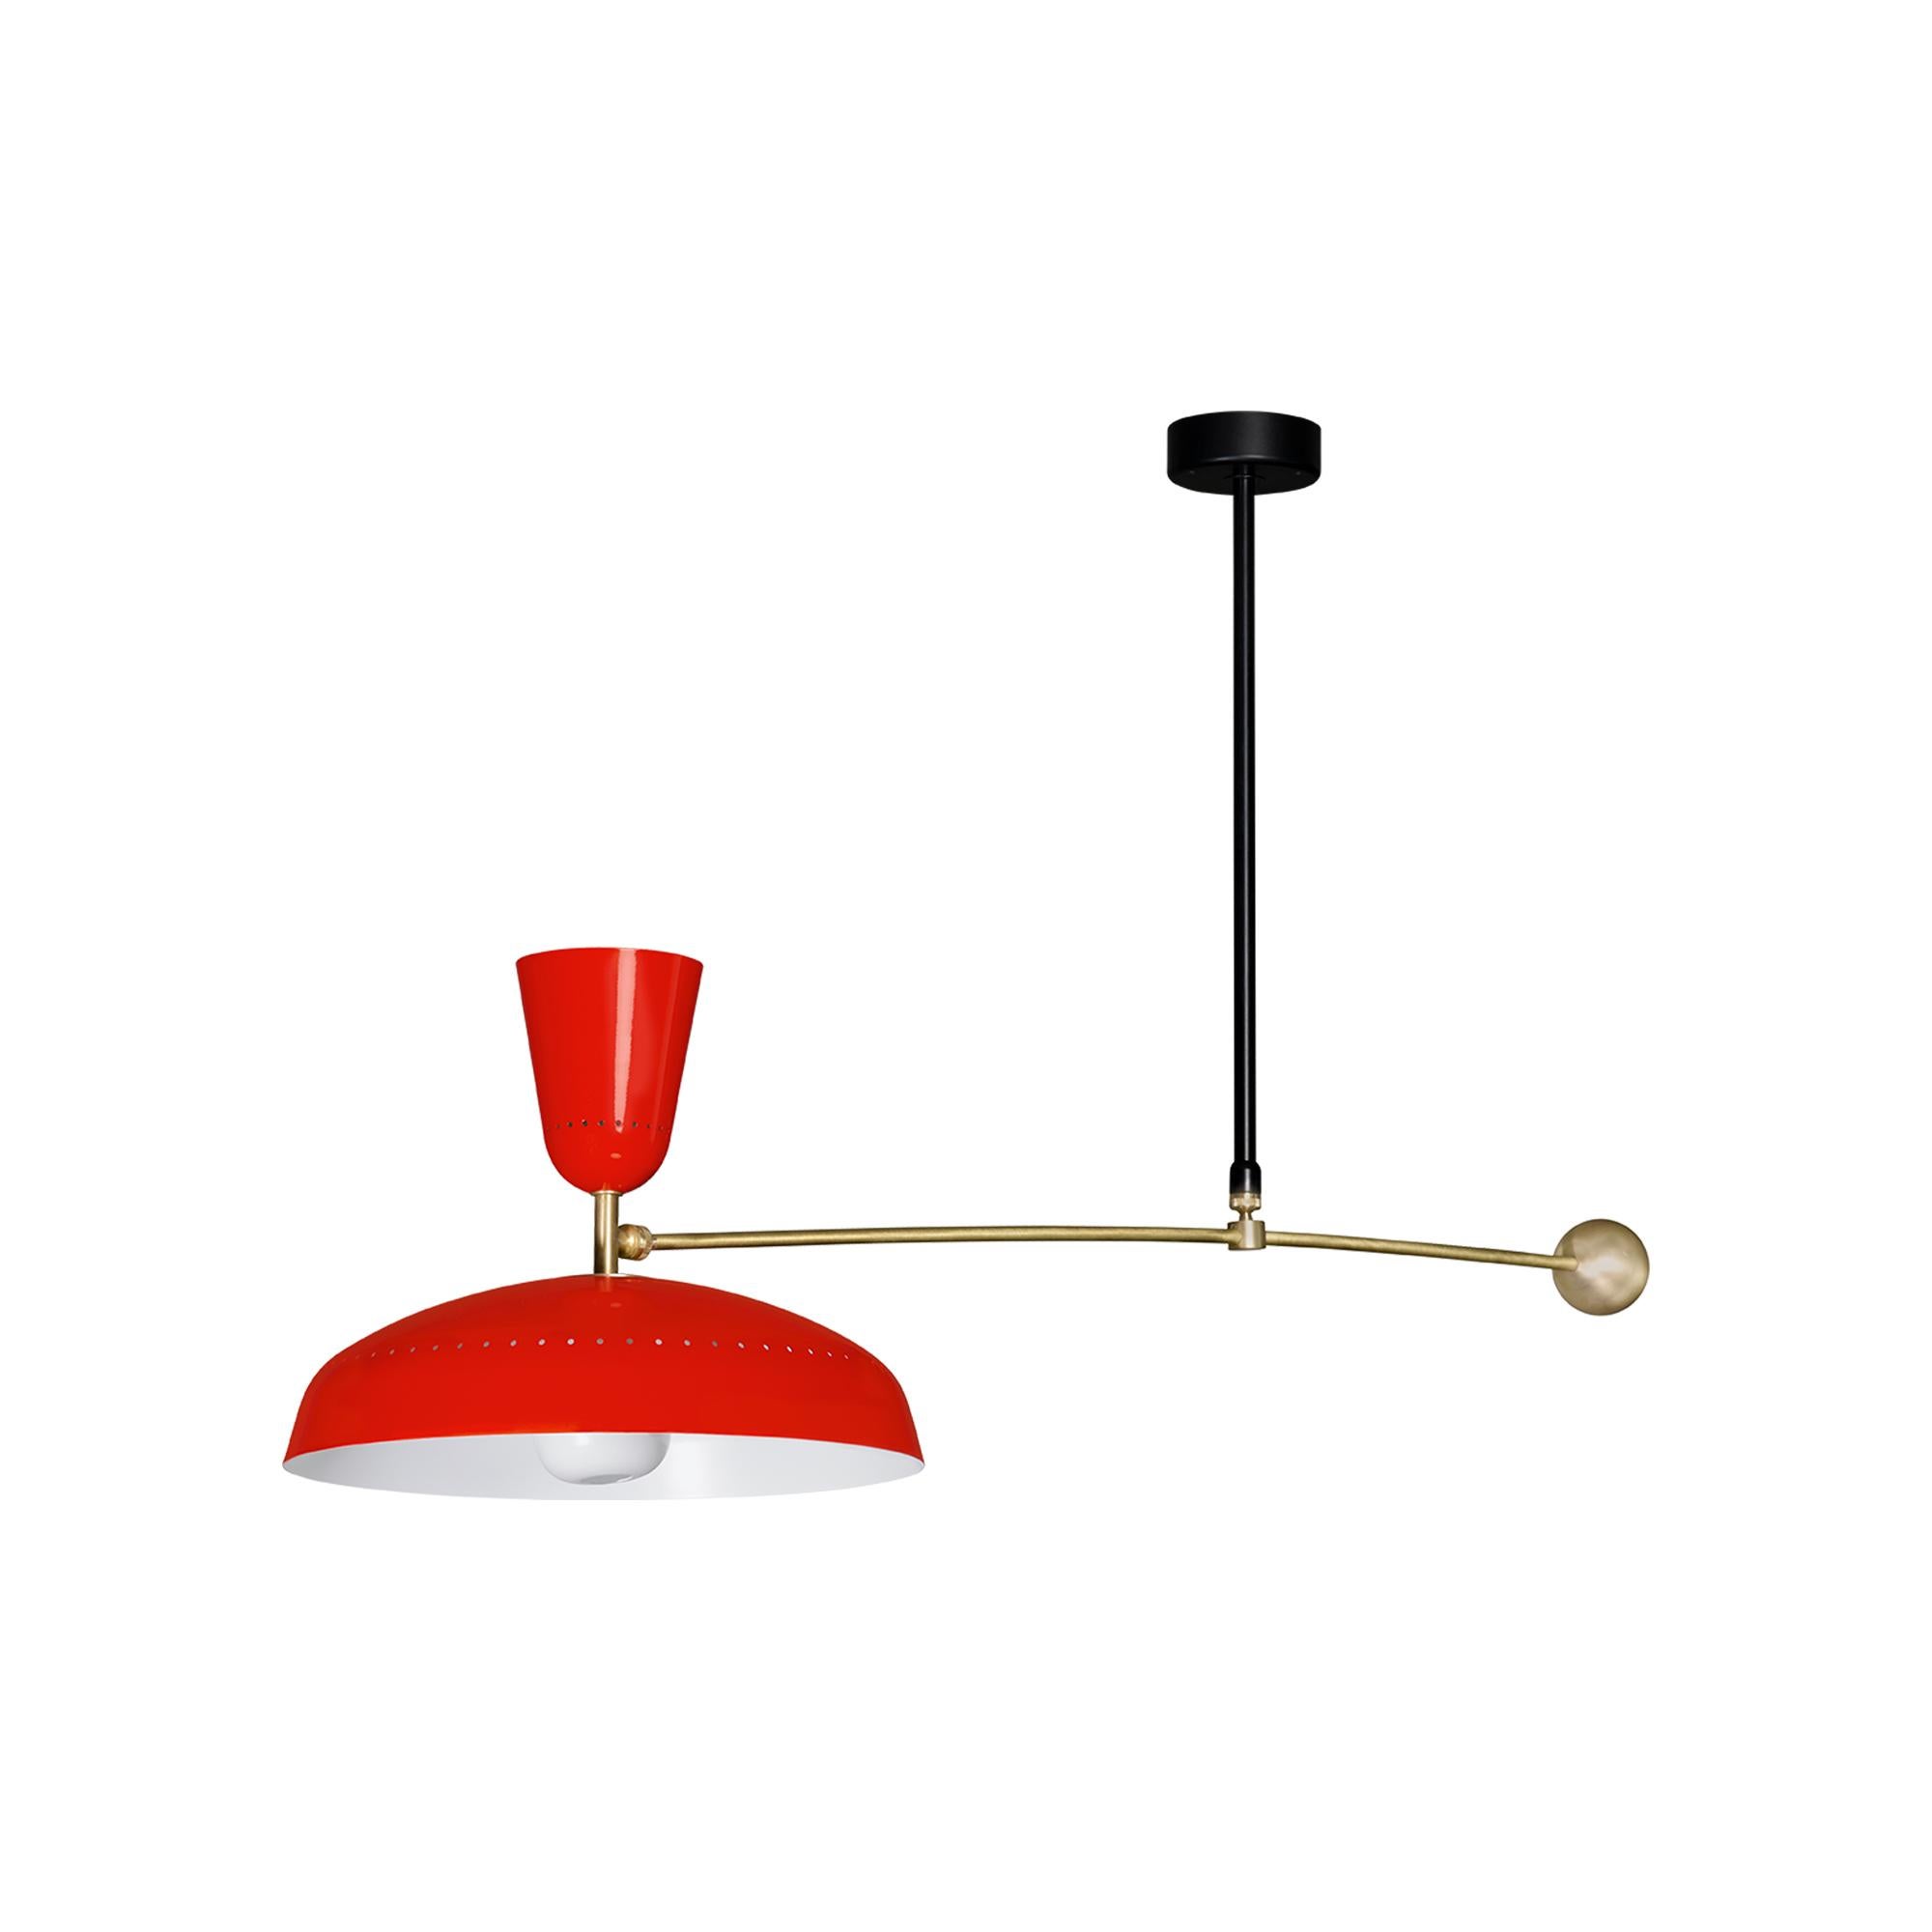 Painted Large Pierre Guariche 'G1' Suspension Lamp for Sammode Studio in Red